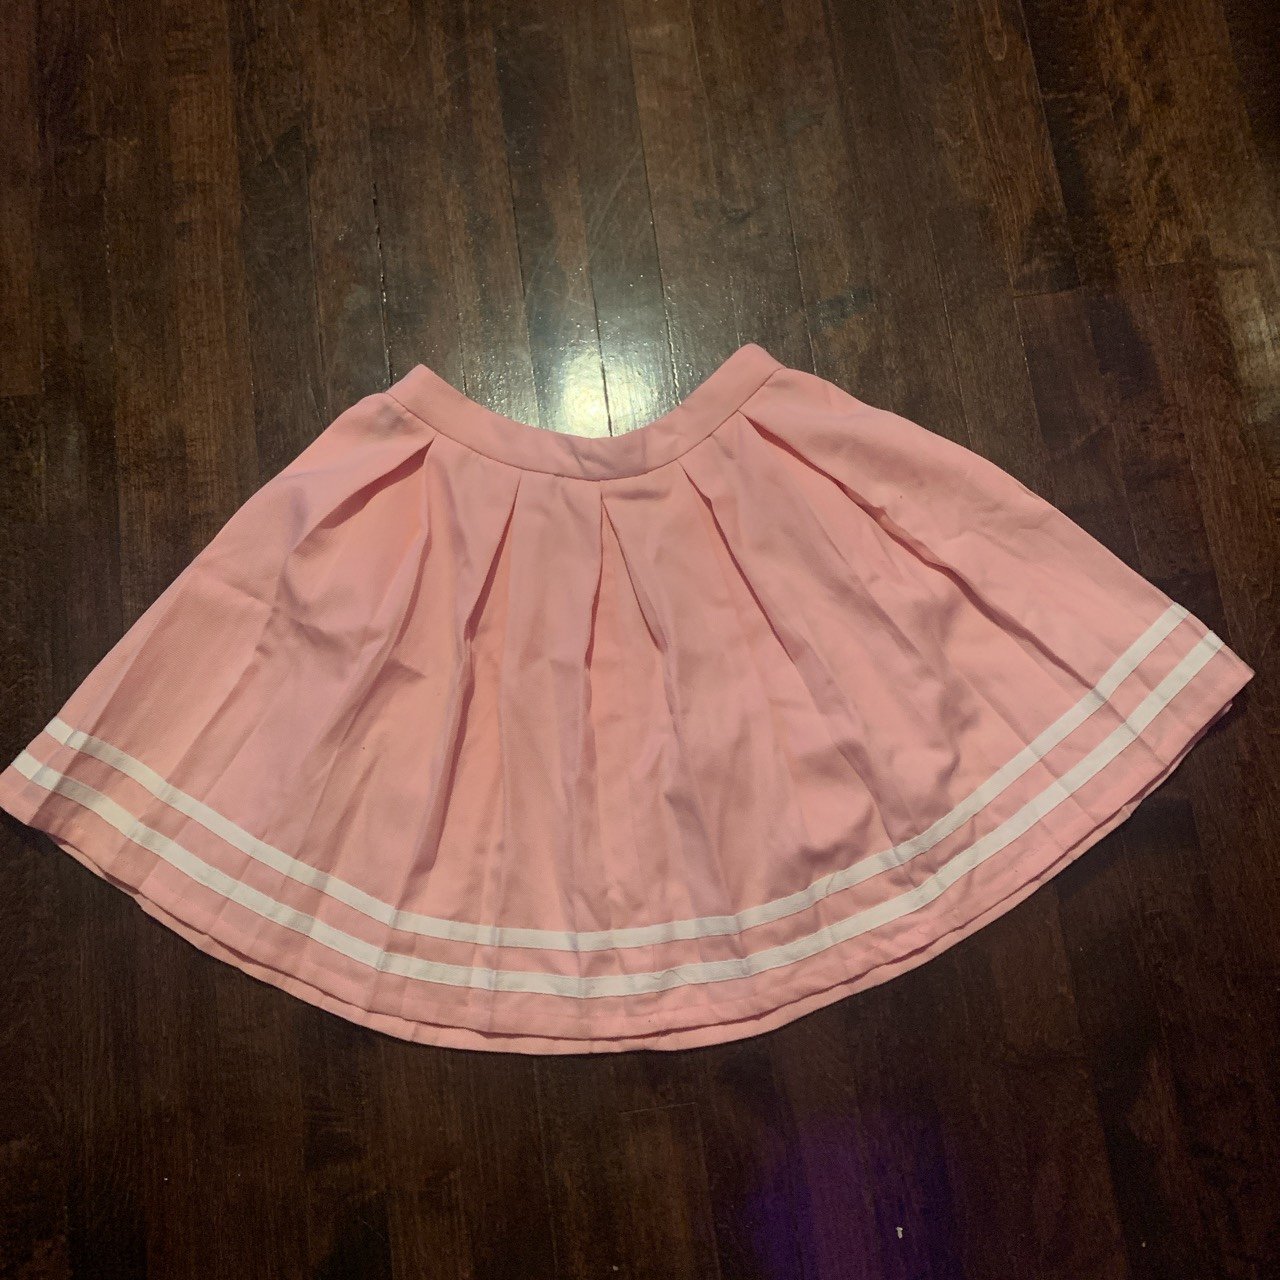 Perfect Hot Topic pleated skirt oHwVGSRNn Wholesale